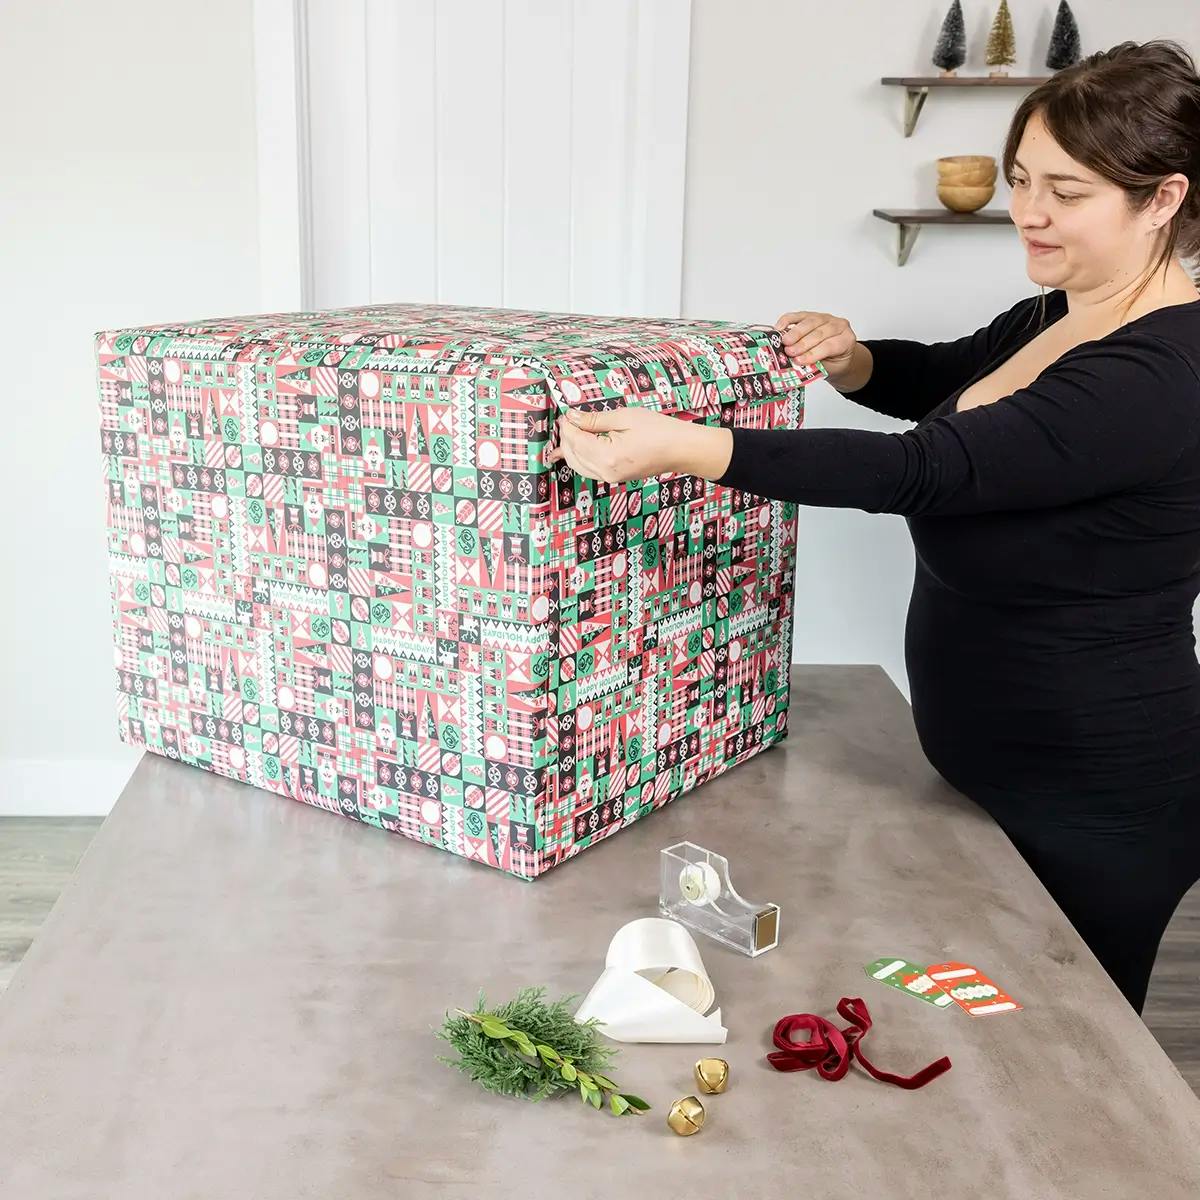 Filling in the blank spaces on a large box with Christmas wrapping paper.